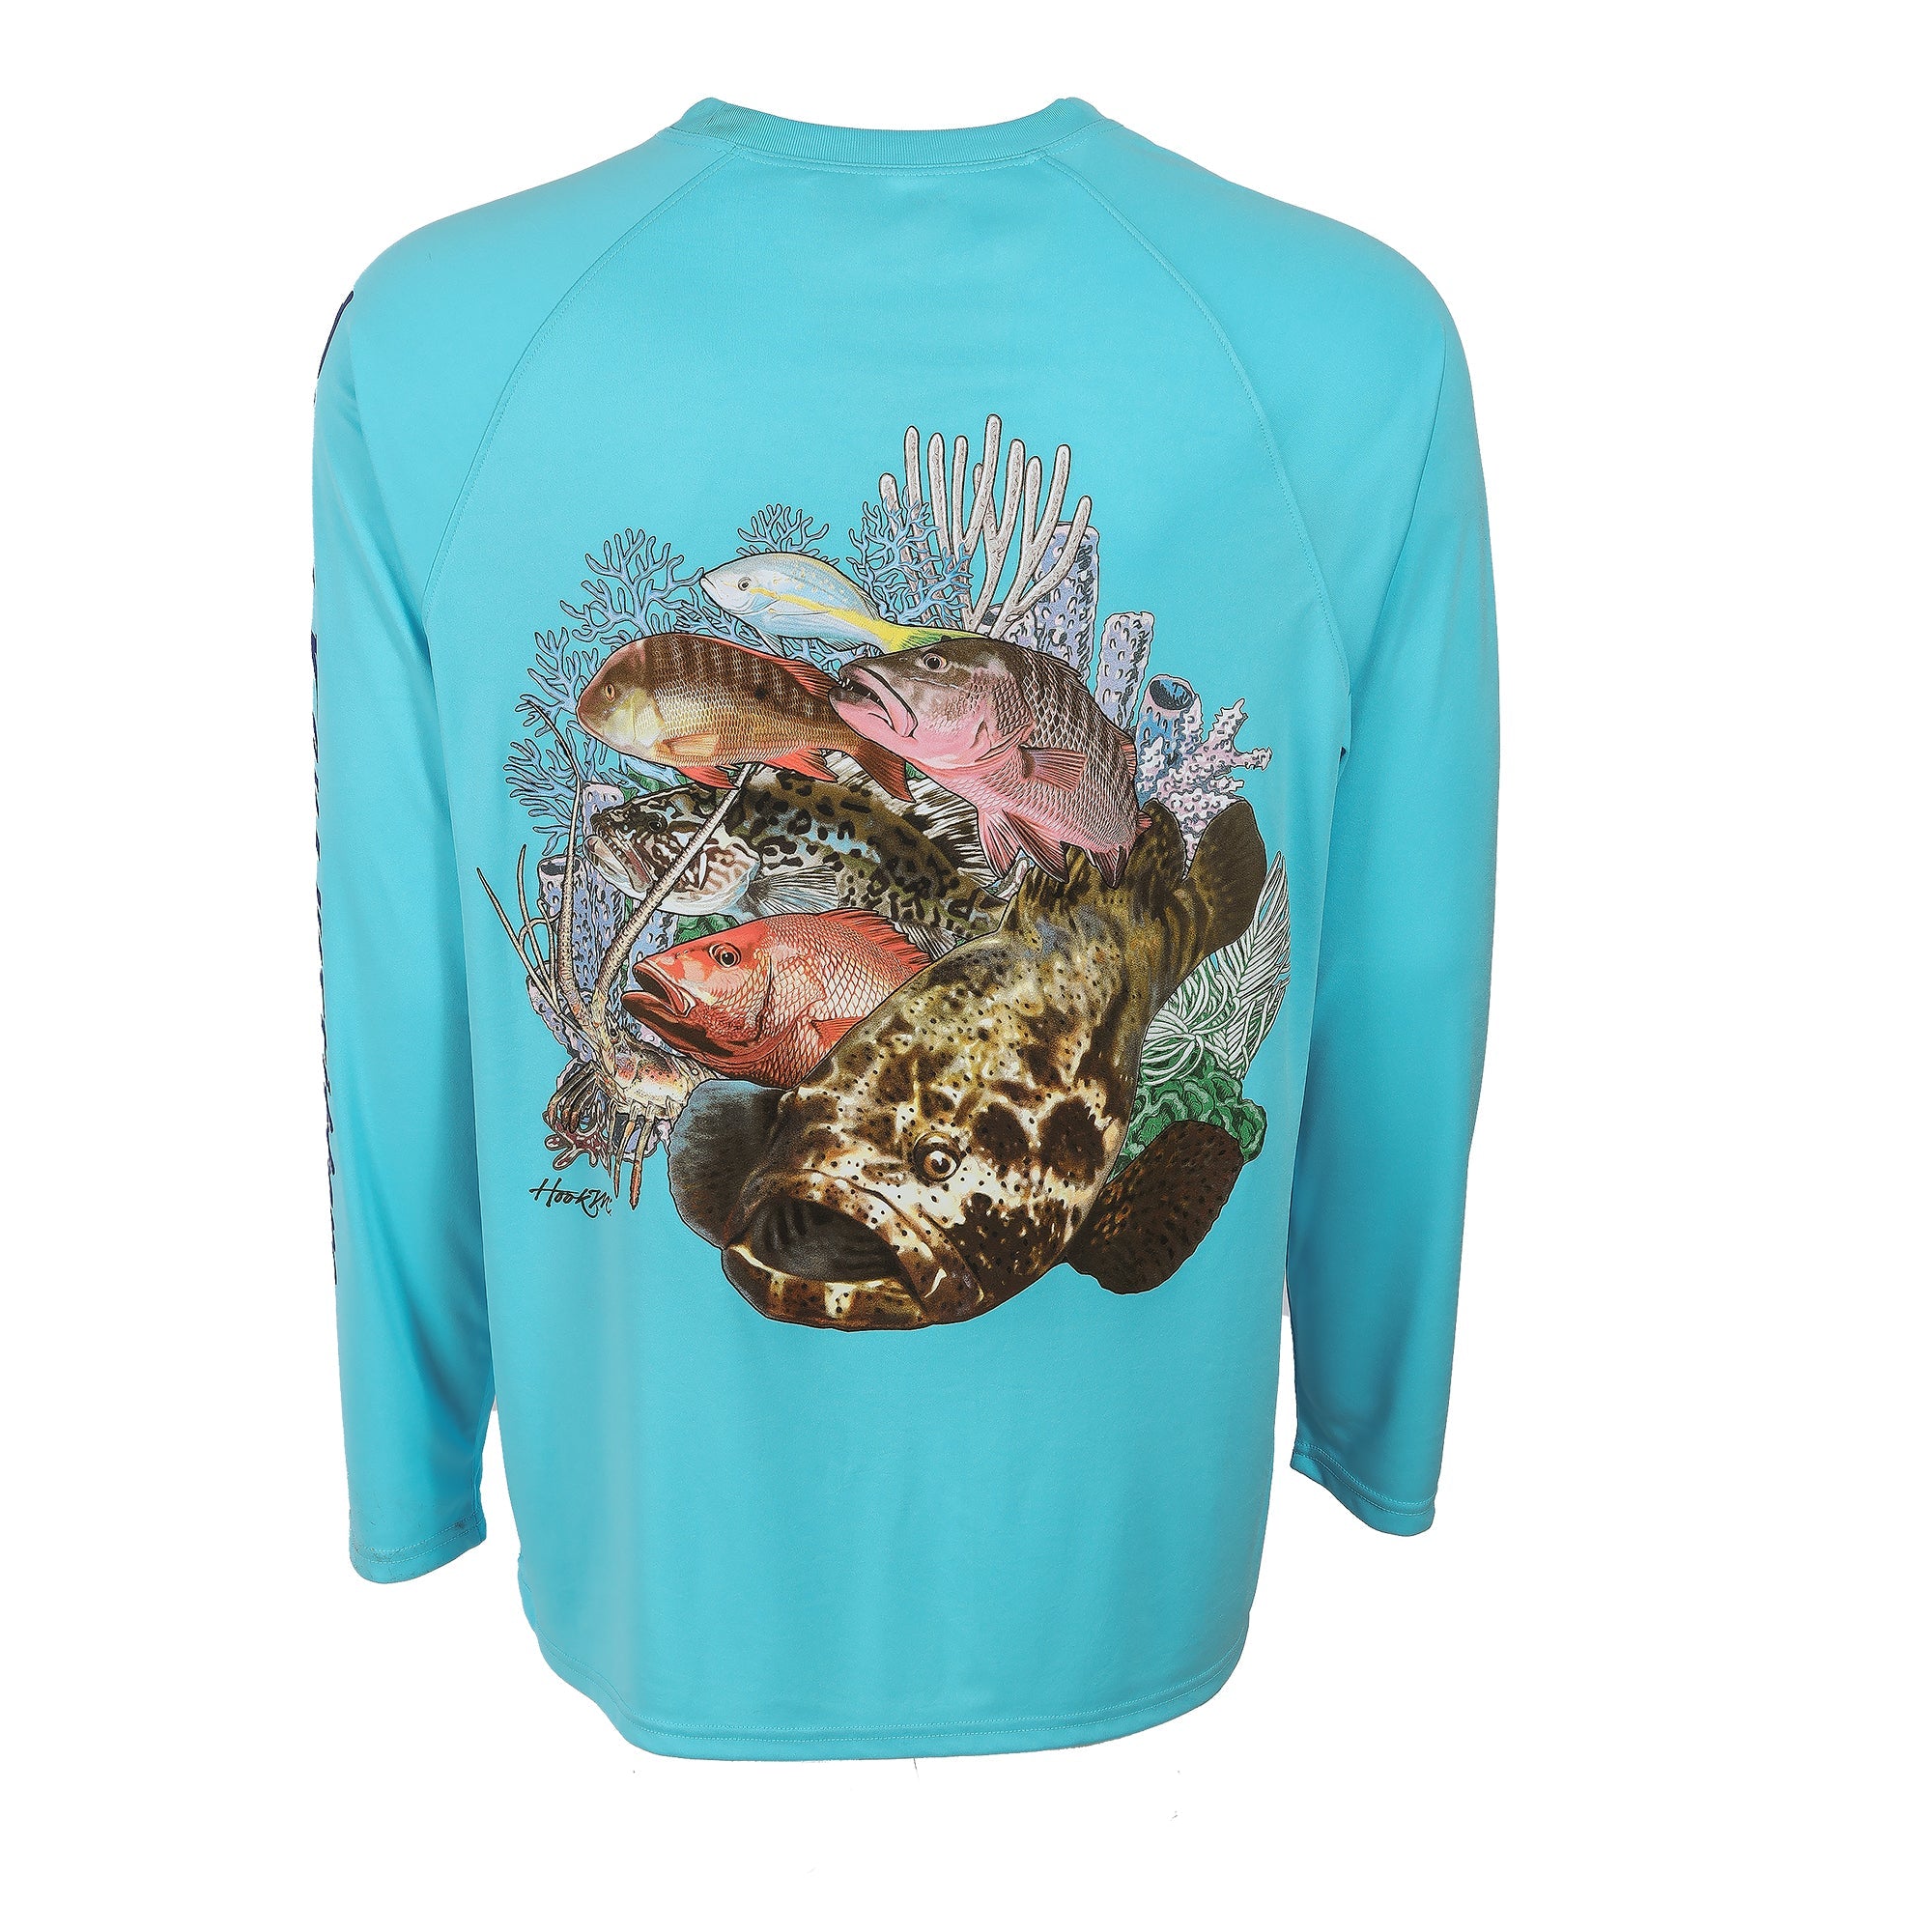 Bimini Bay Outfitters Classic Outfitter Short Sleeve Graphic Tee